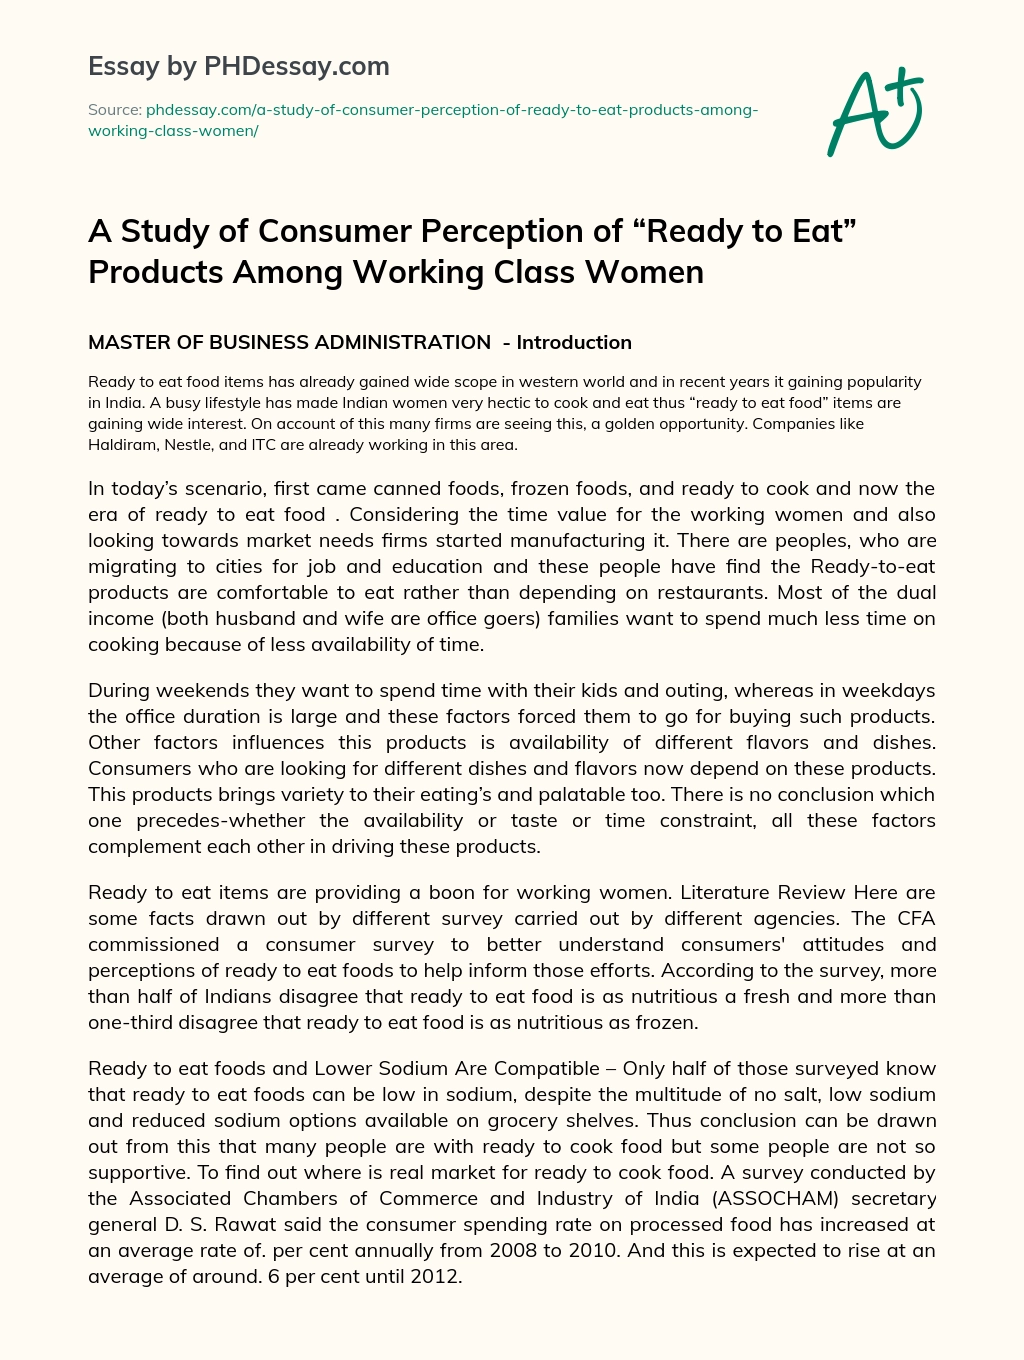 A Study of Consumer Perception of “Ready to Eat” Products Among Working Class Women essay